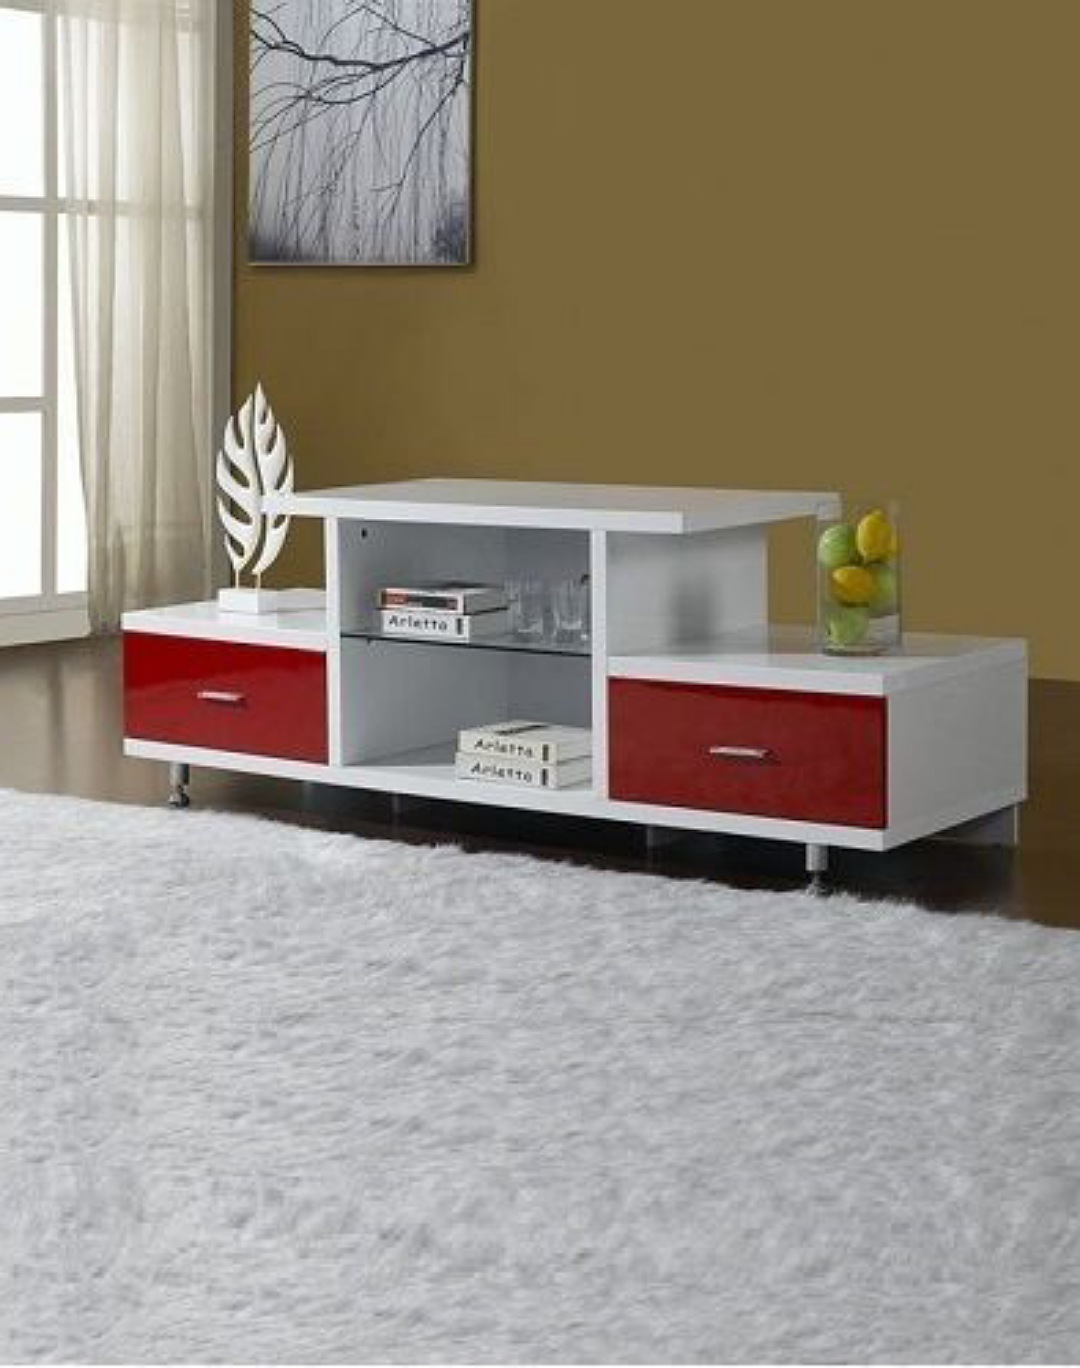 Mirabelle styles Tv stand